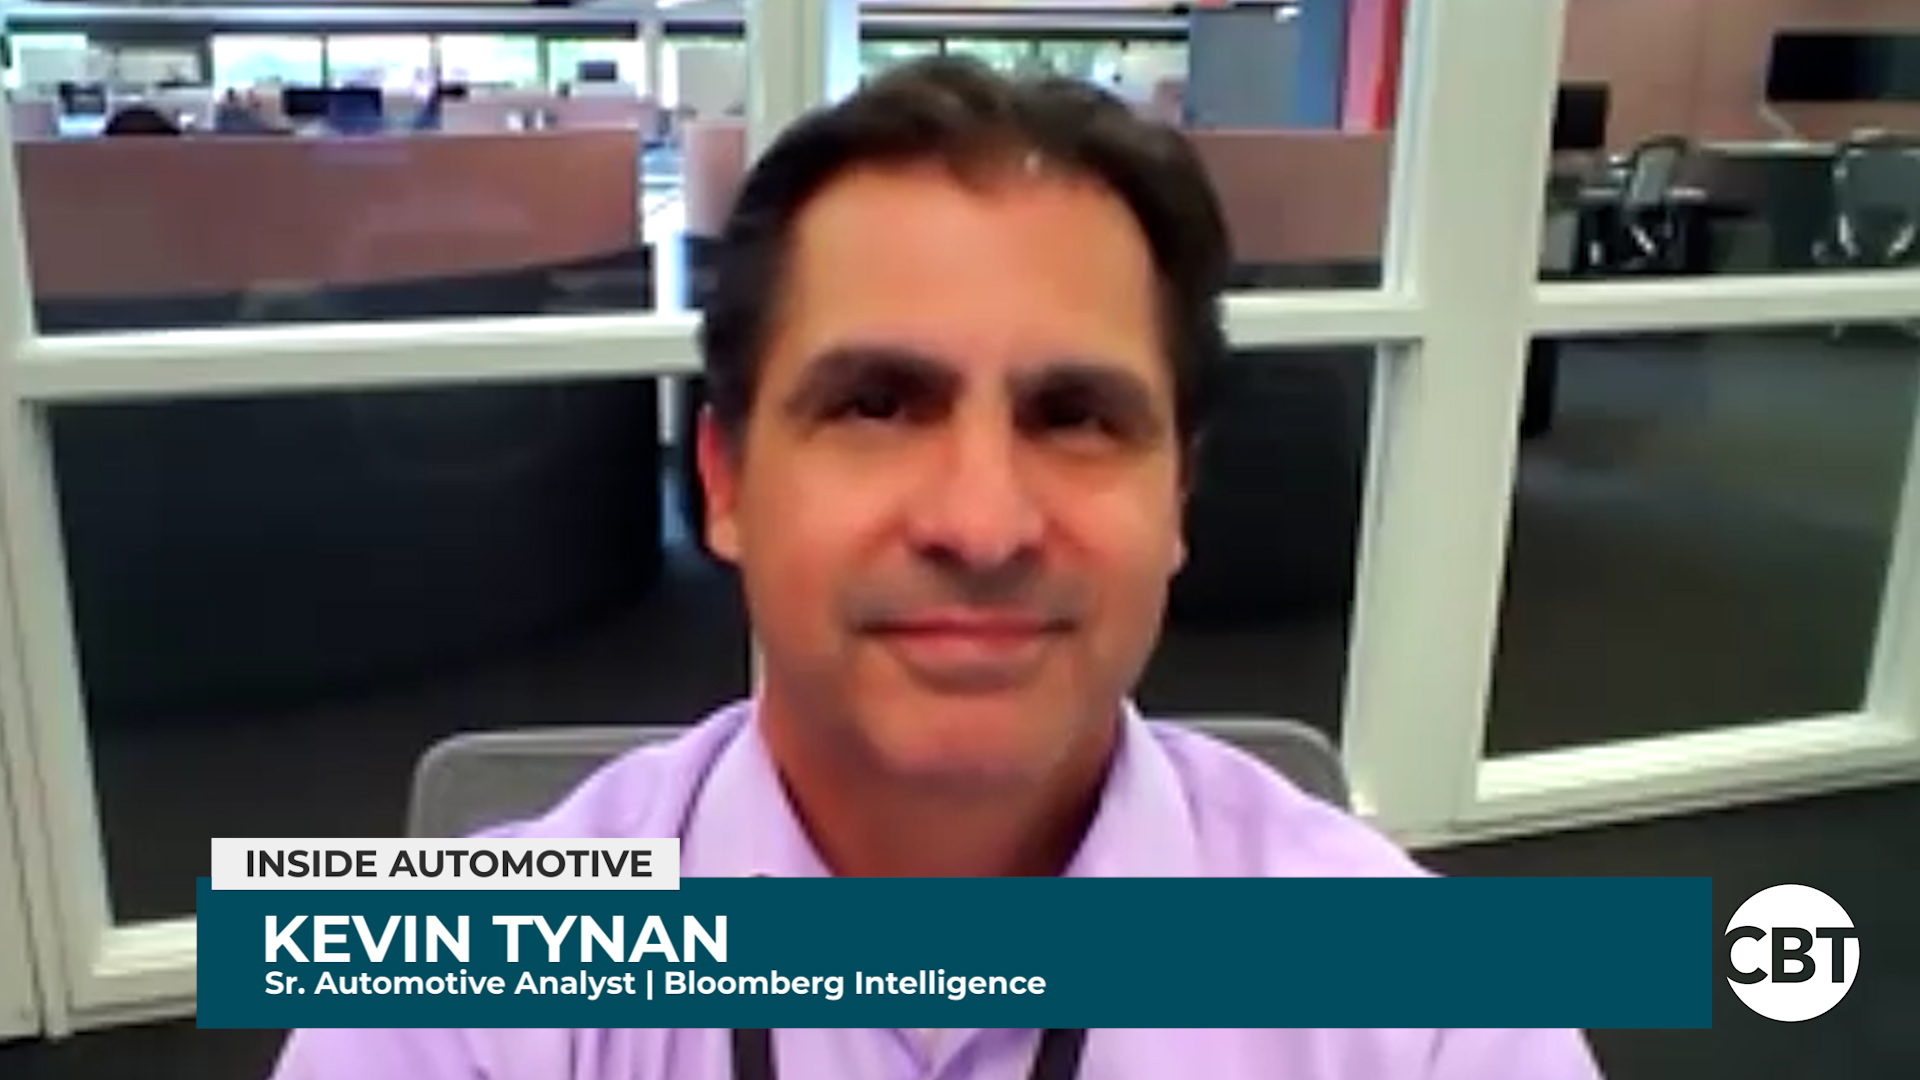 Kevin Tynan joins Inside Automotive to discuss the role EV disruptors played in the Bloomberg Intelligence midyear outlook